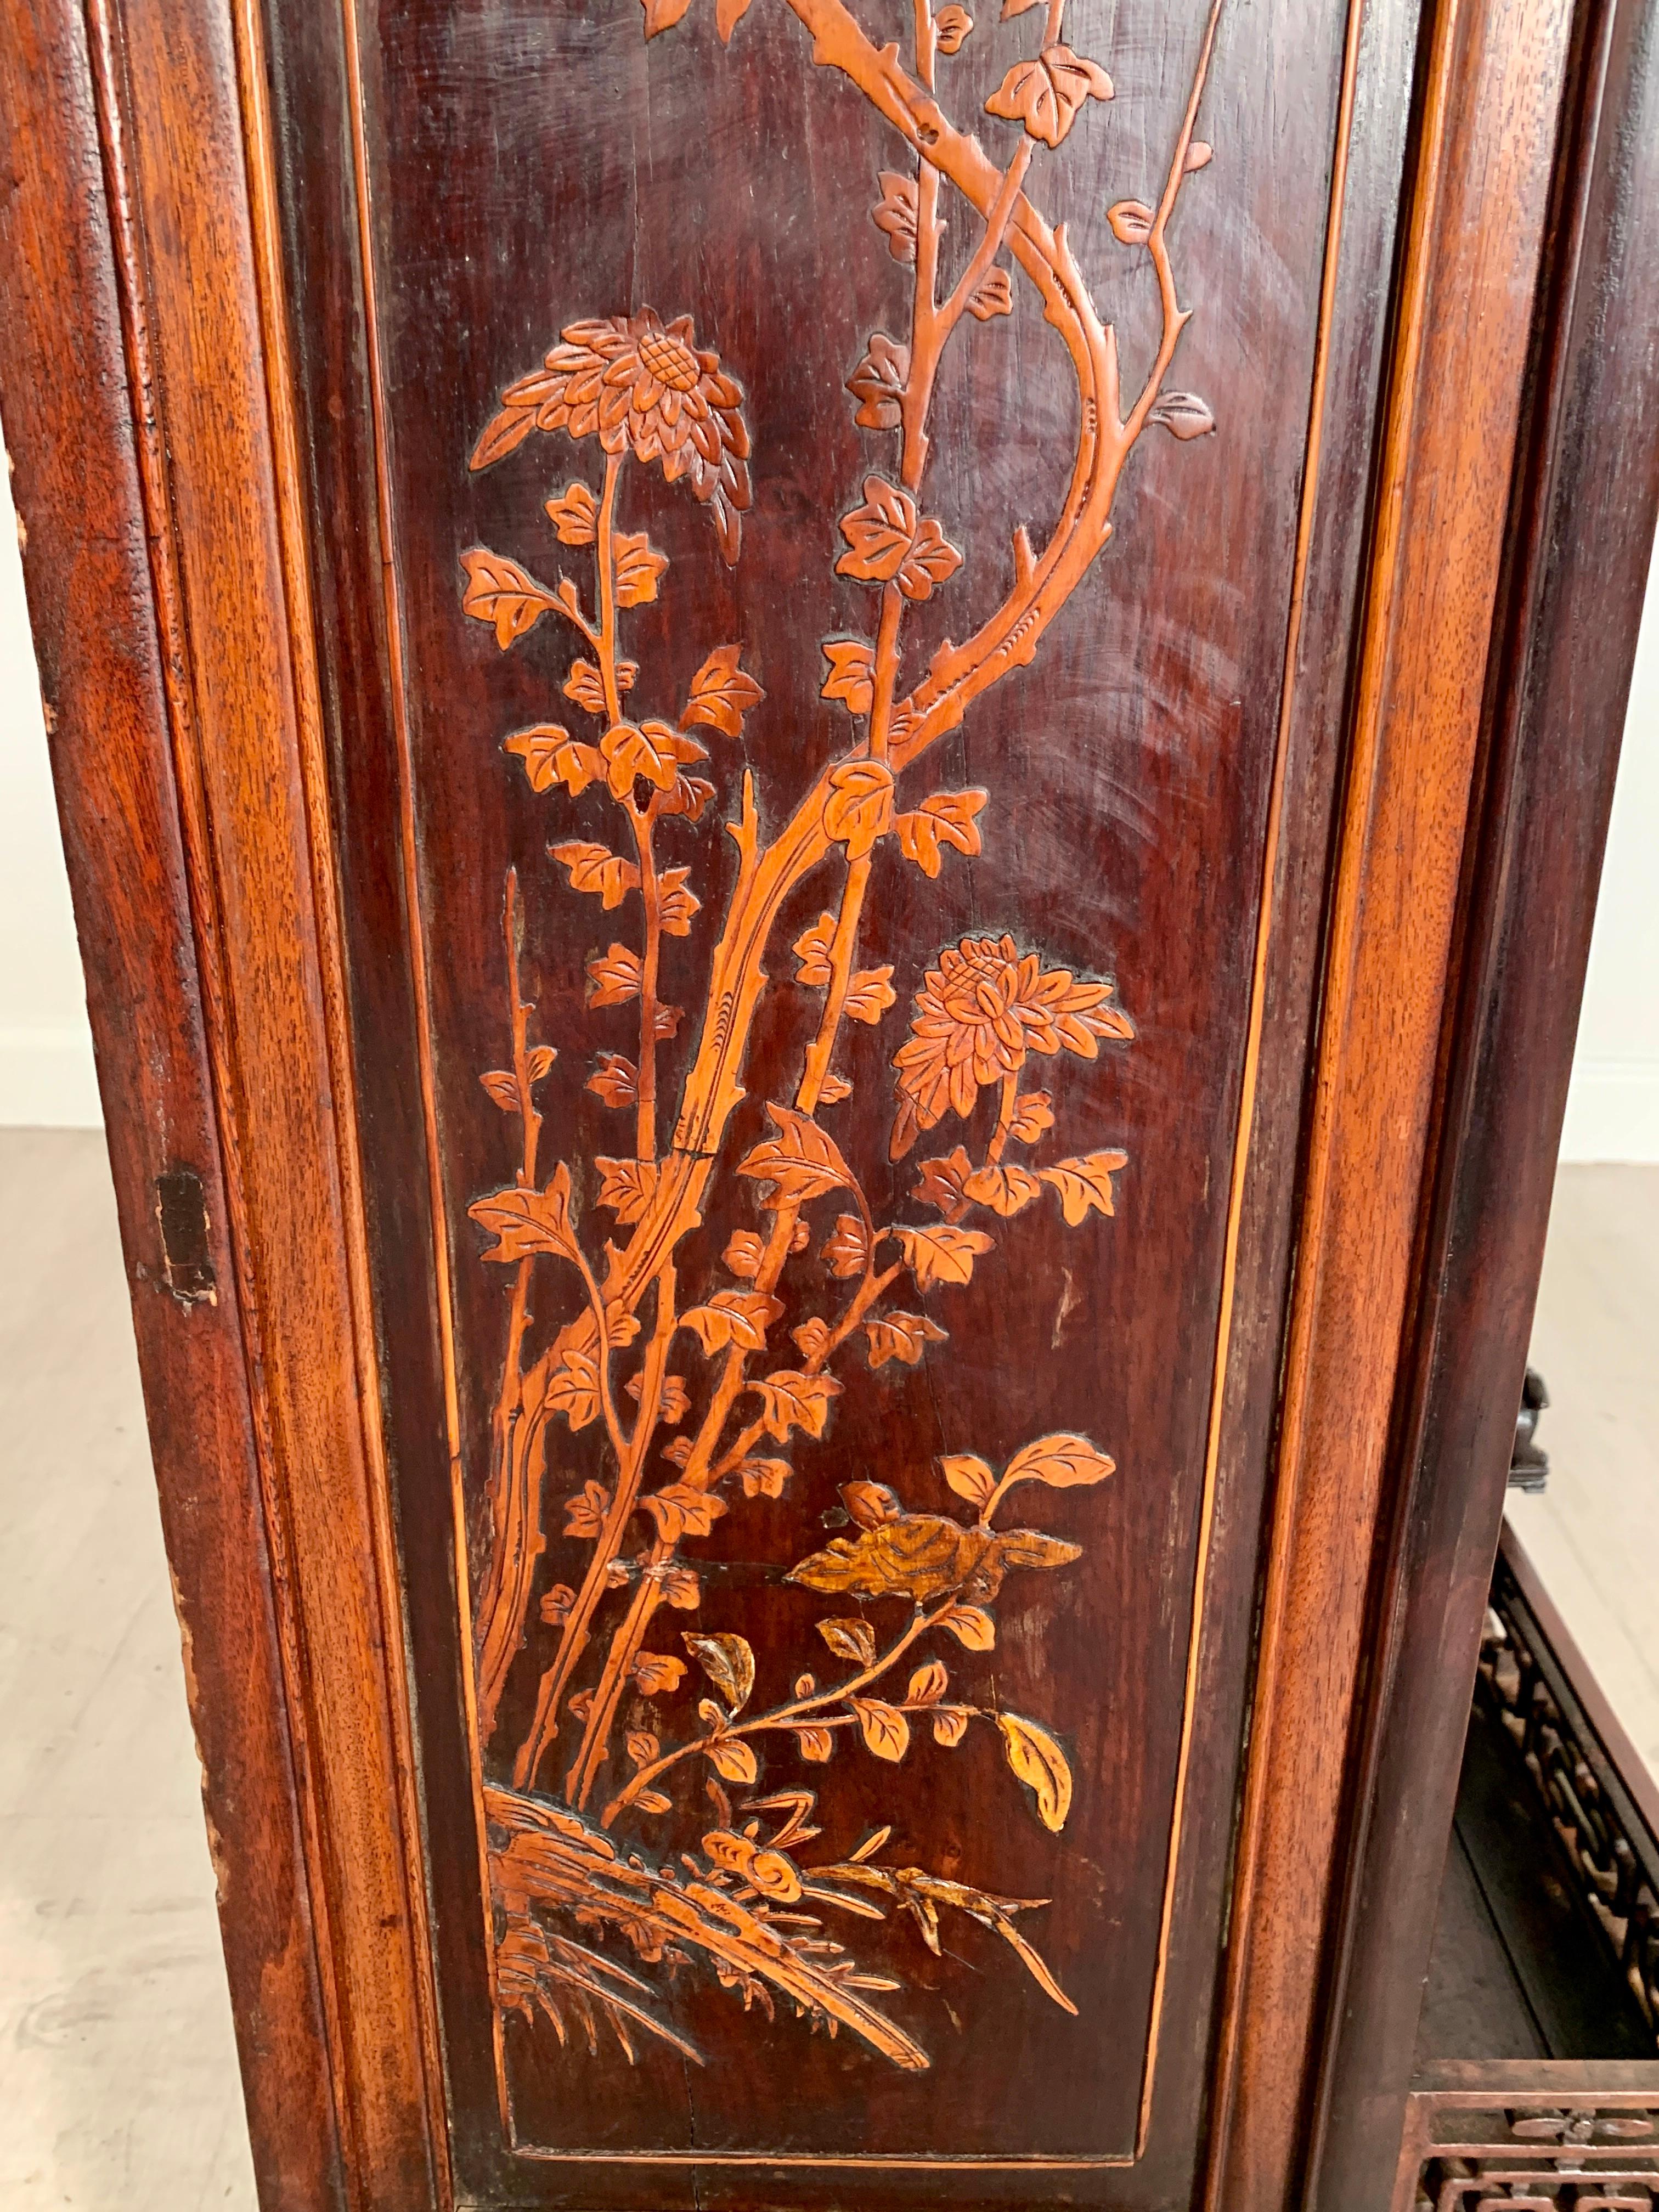 Chinese Peranakan Inlaid Hardwood Pagoda Display Cabinet, Early 20th Century For Sale 8